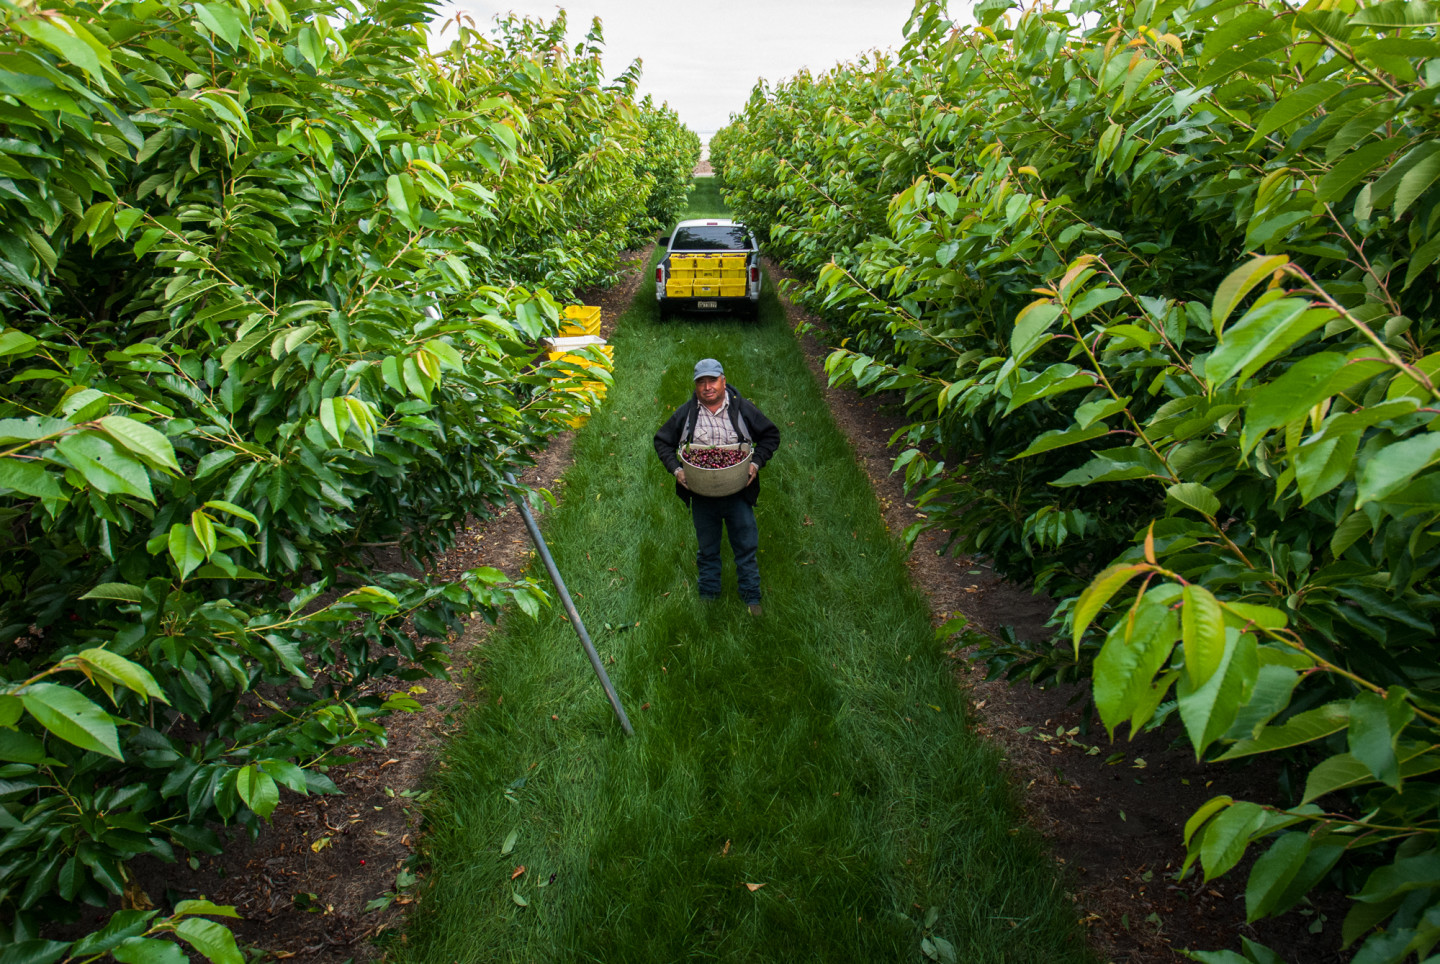 Farm worker, Juan Espinoza, stands amid the rows of healthy cherry trees in Gilroy, Calif. Cynthia E. Wood/KQED